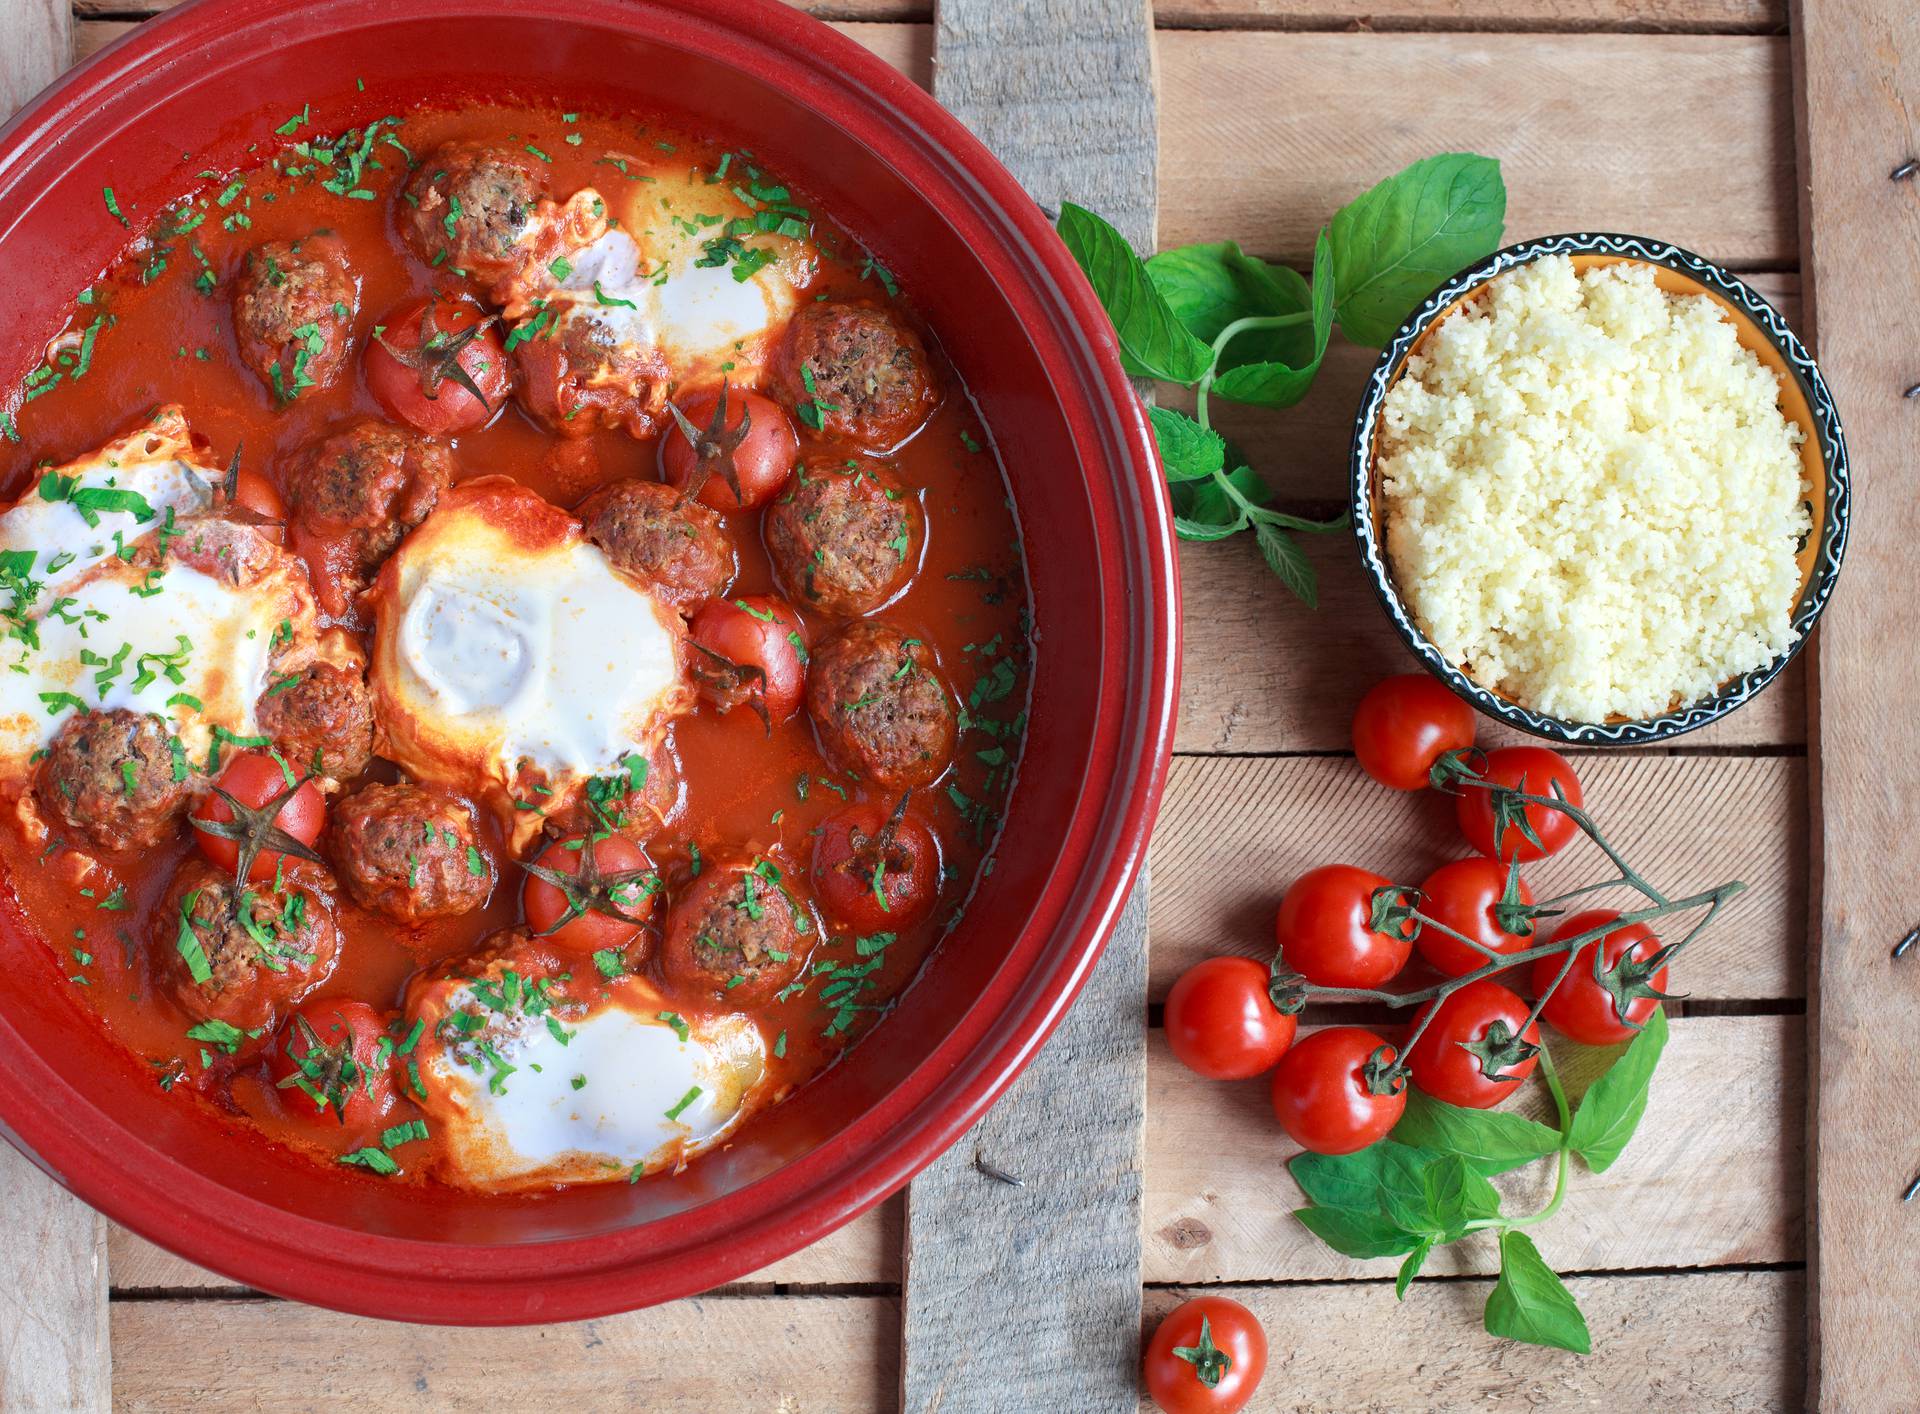 Moroccan tagine of lamb with kefta (meatballs), tomatoes and eggs